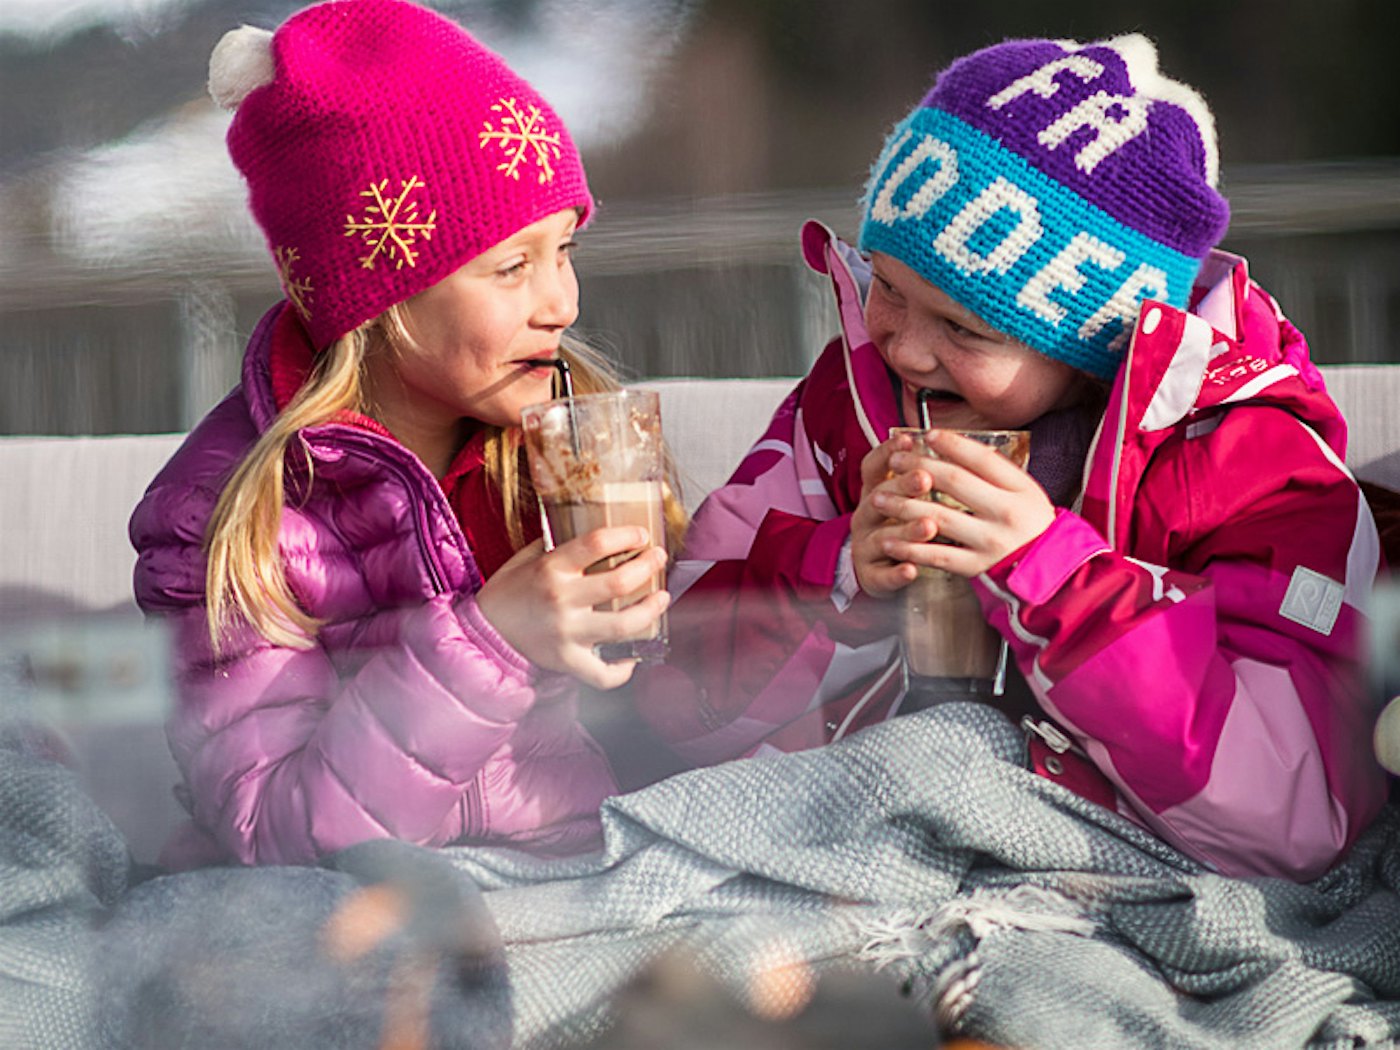 Two girls laugh and drink cocoa by the fire with blankets over them in winter. Photo